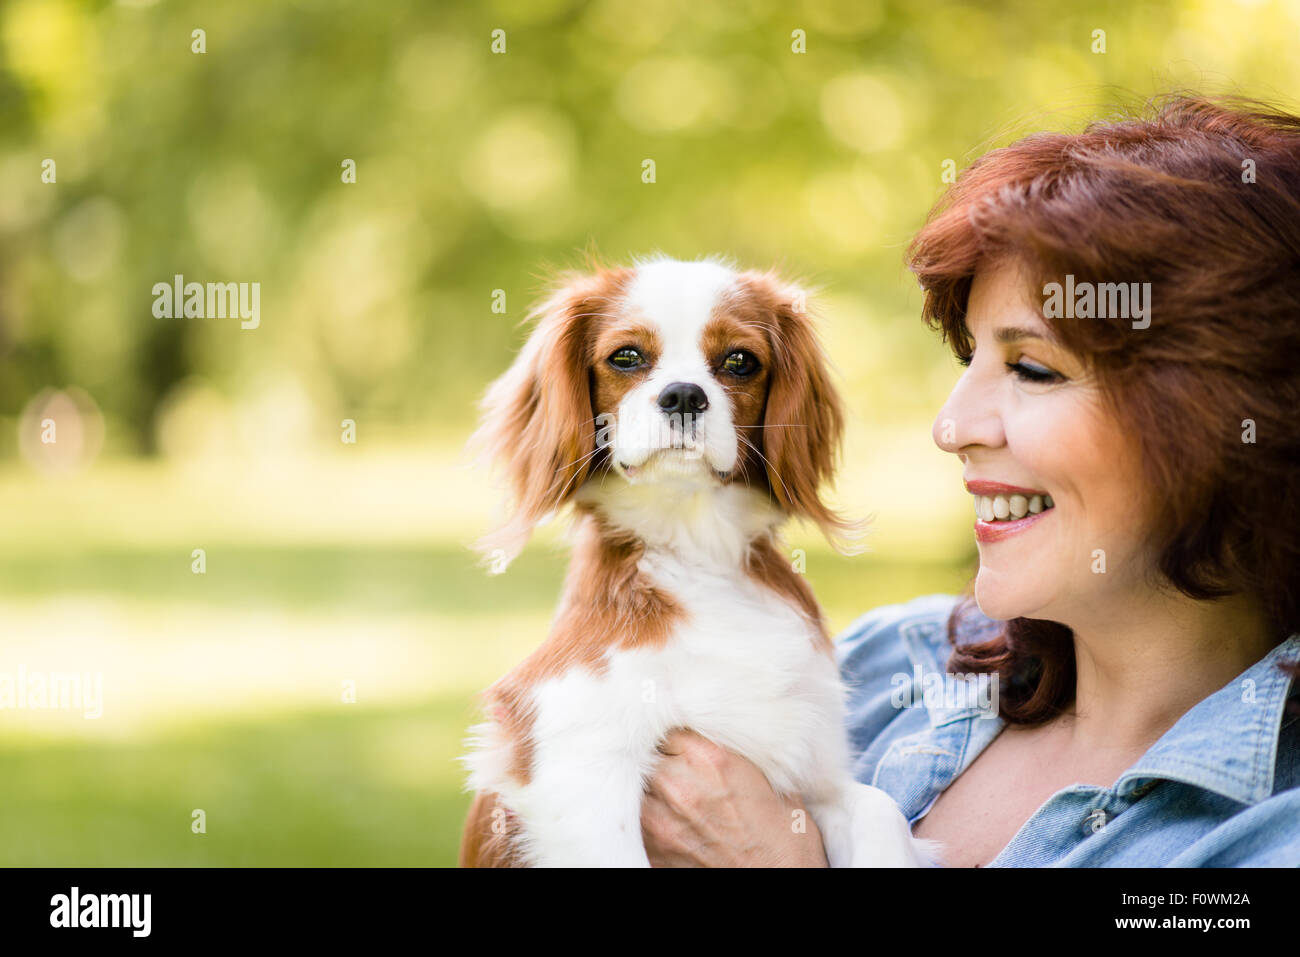 Mature woman playing with her cavalier dog outdoor in park Stock Photo